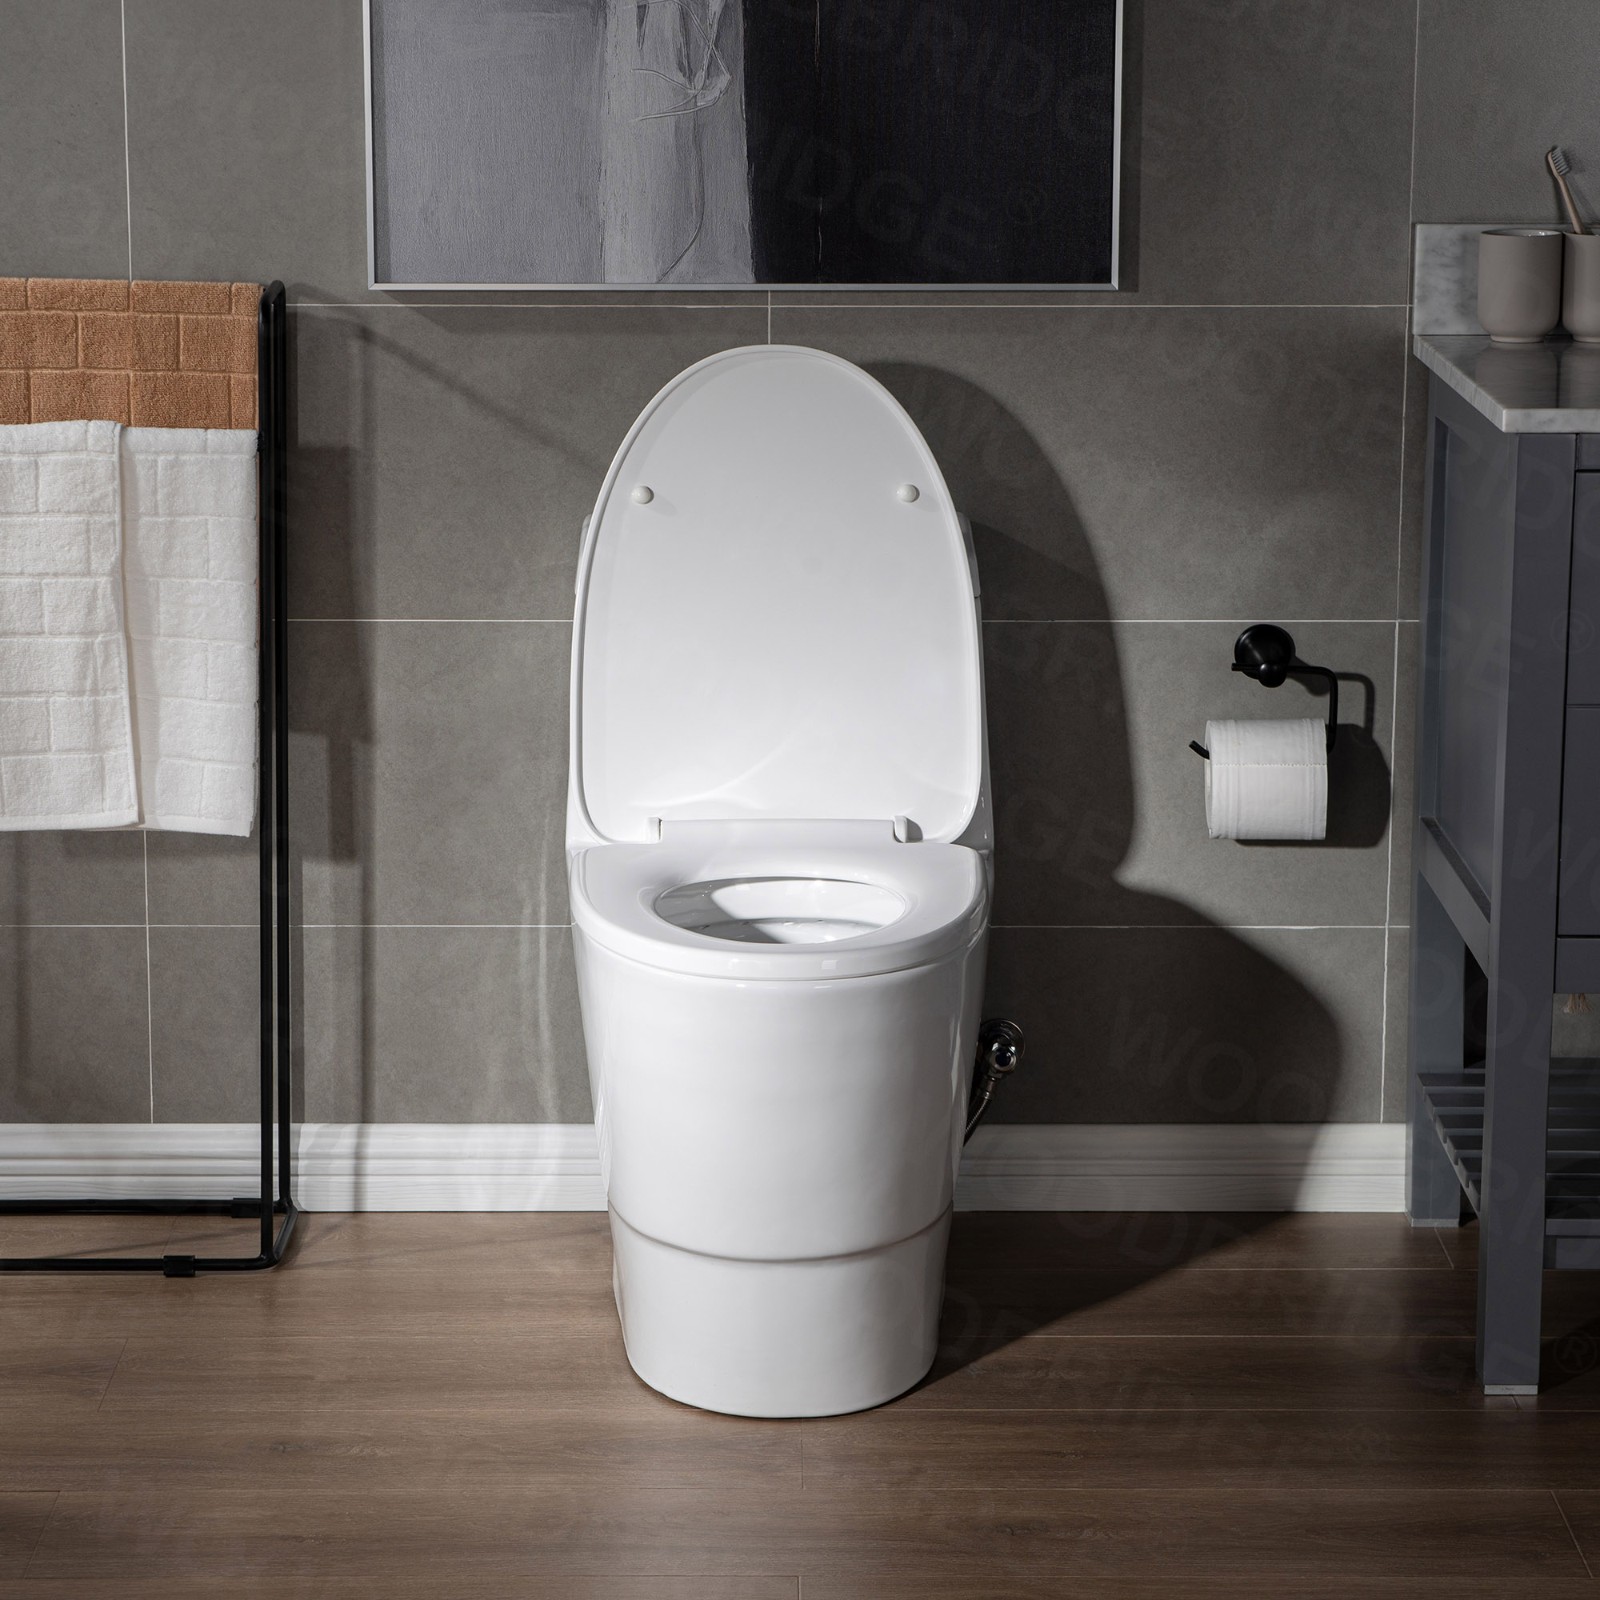  WOODBRIDGEE One Piece Toilet with Soft Closing Seat, Chair Height, 1.28 GPF Dual, Water Sensed, 1000 Gram MaP Flushing Score Toilet with Oil Rubbed Bronze Button T0001-ORB, White_5702